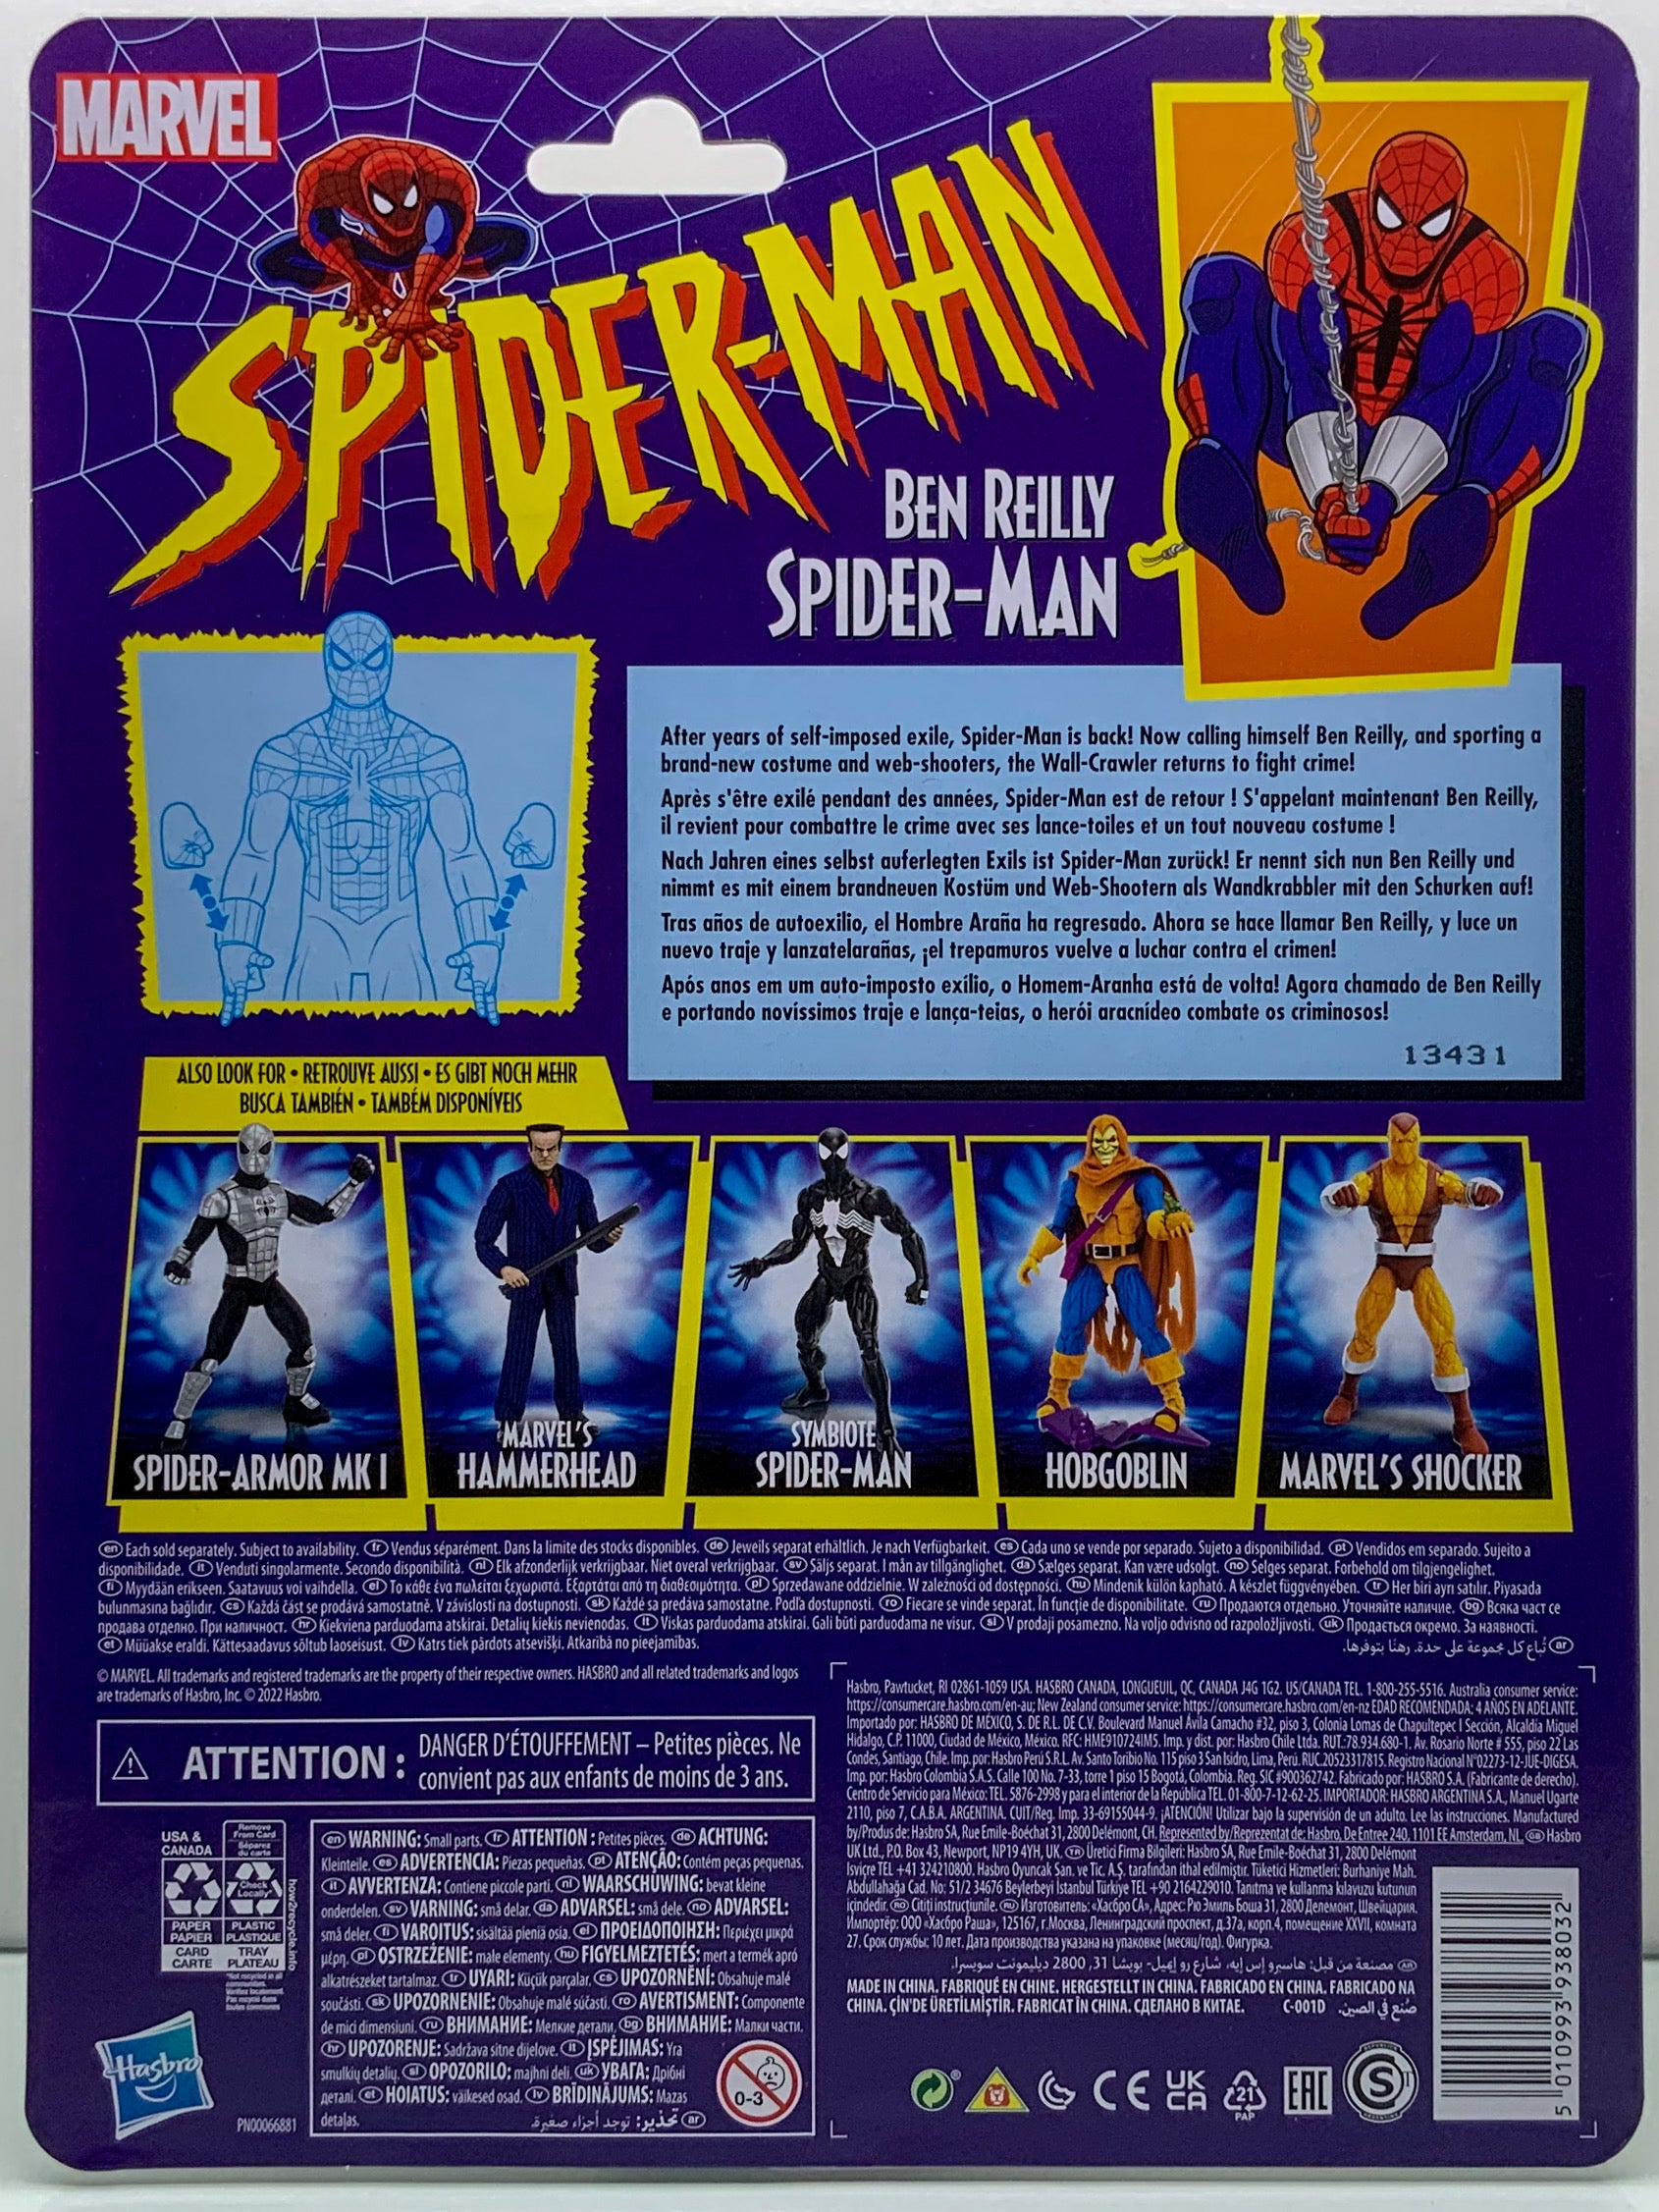 Buy Now at tatoyshop.com  This 6-inch Legends Series Spider-Man: Ben Reilly figure features extensive articulation, offering dynamic posability with other Marvel Legends figures. Includes retro-style cardback inspired by the classic Marvel Toy Biz designs Shop Now Tatoy Domestic International Shipping Available New Zealand and Australia  